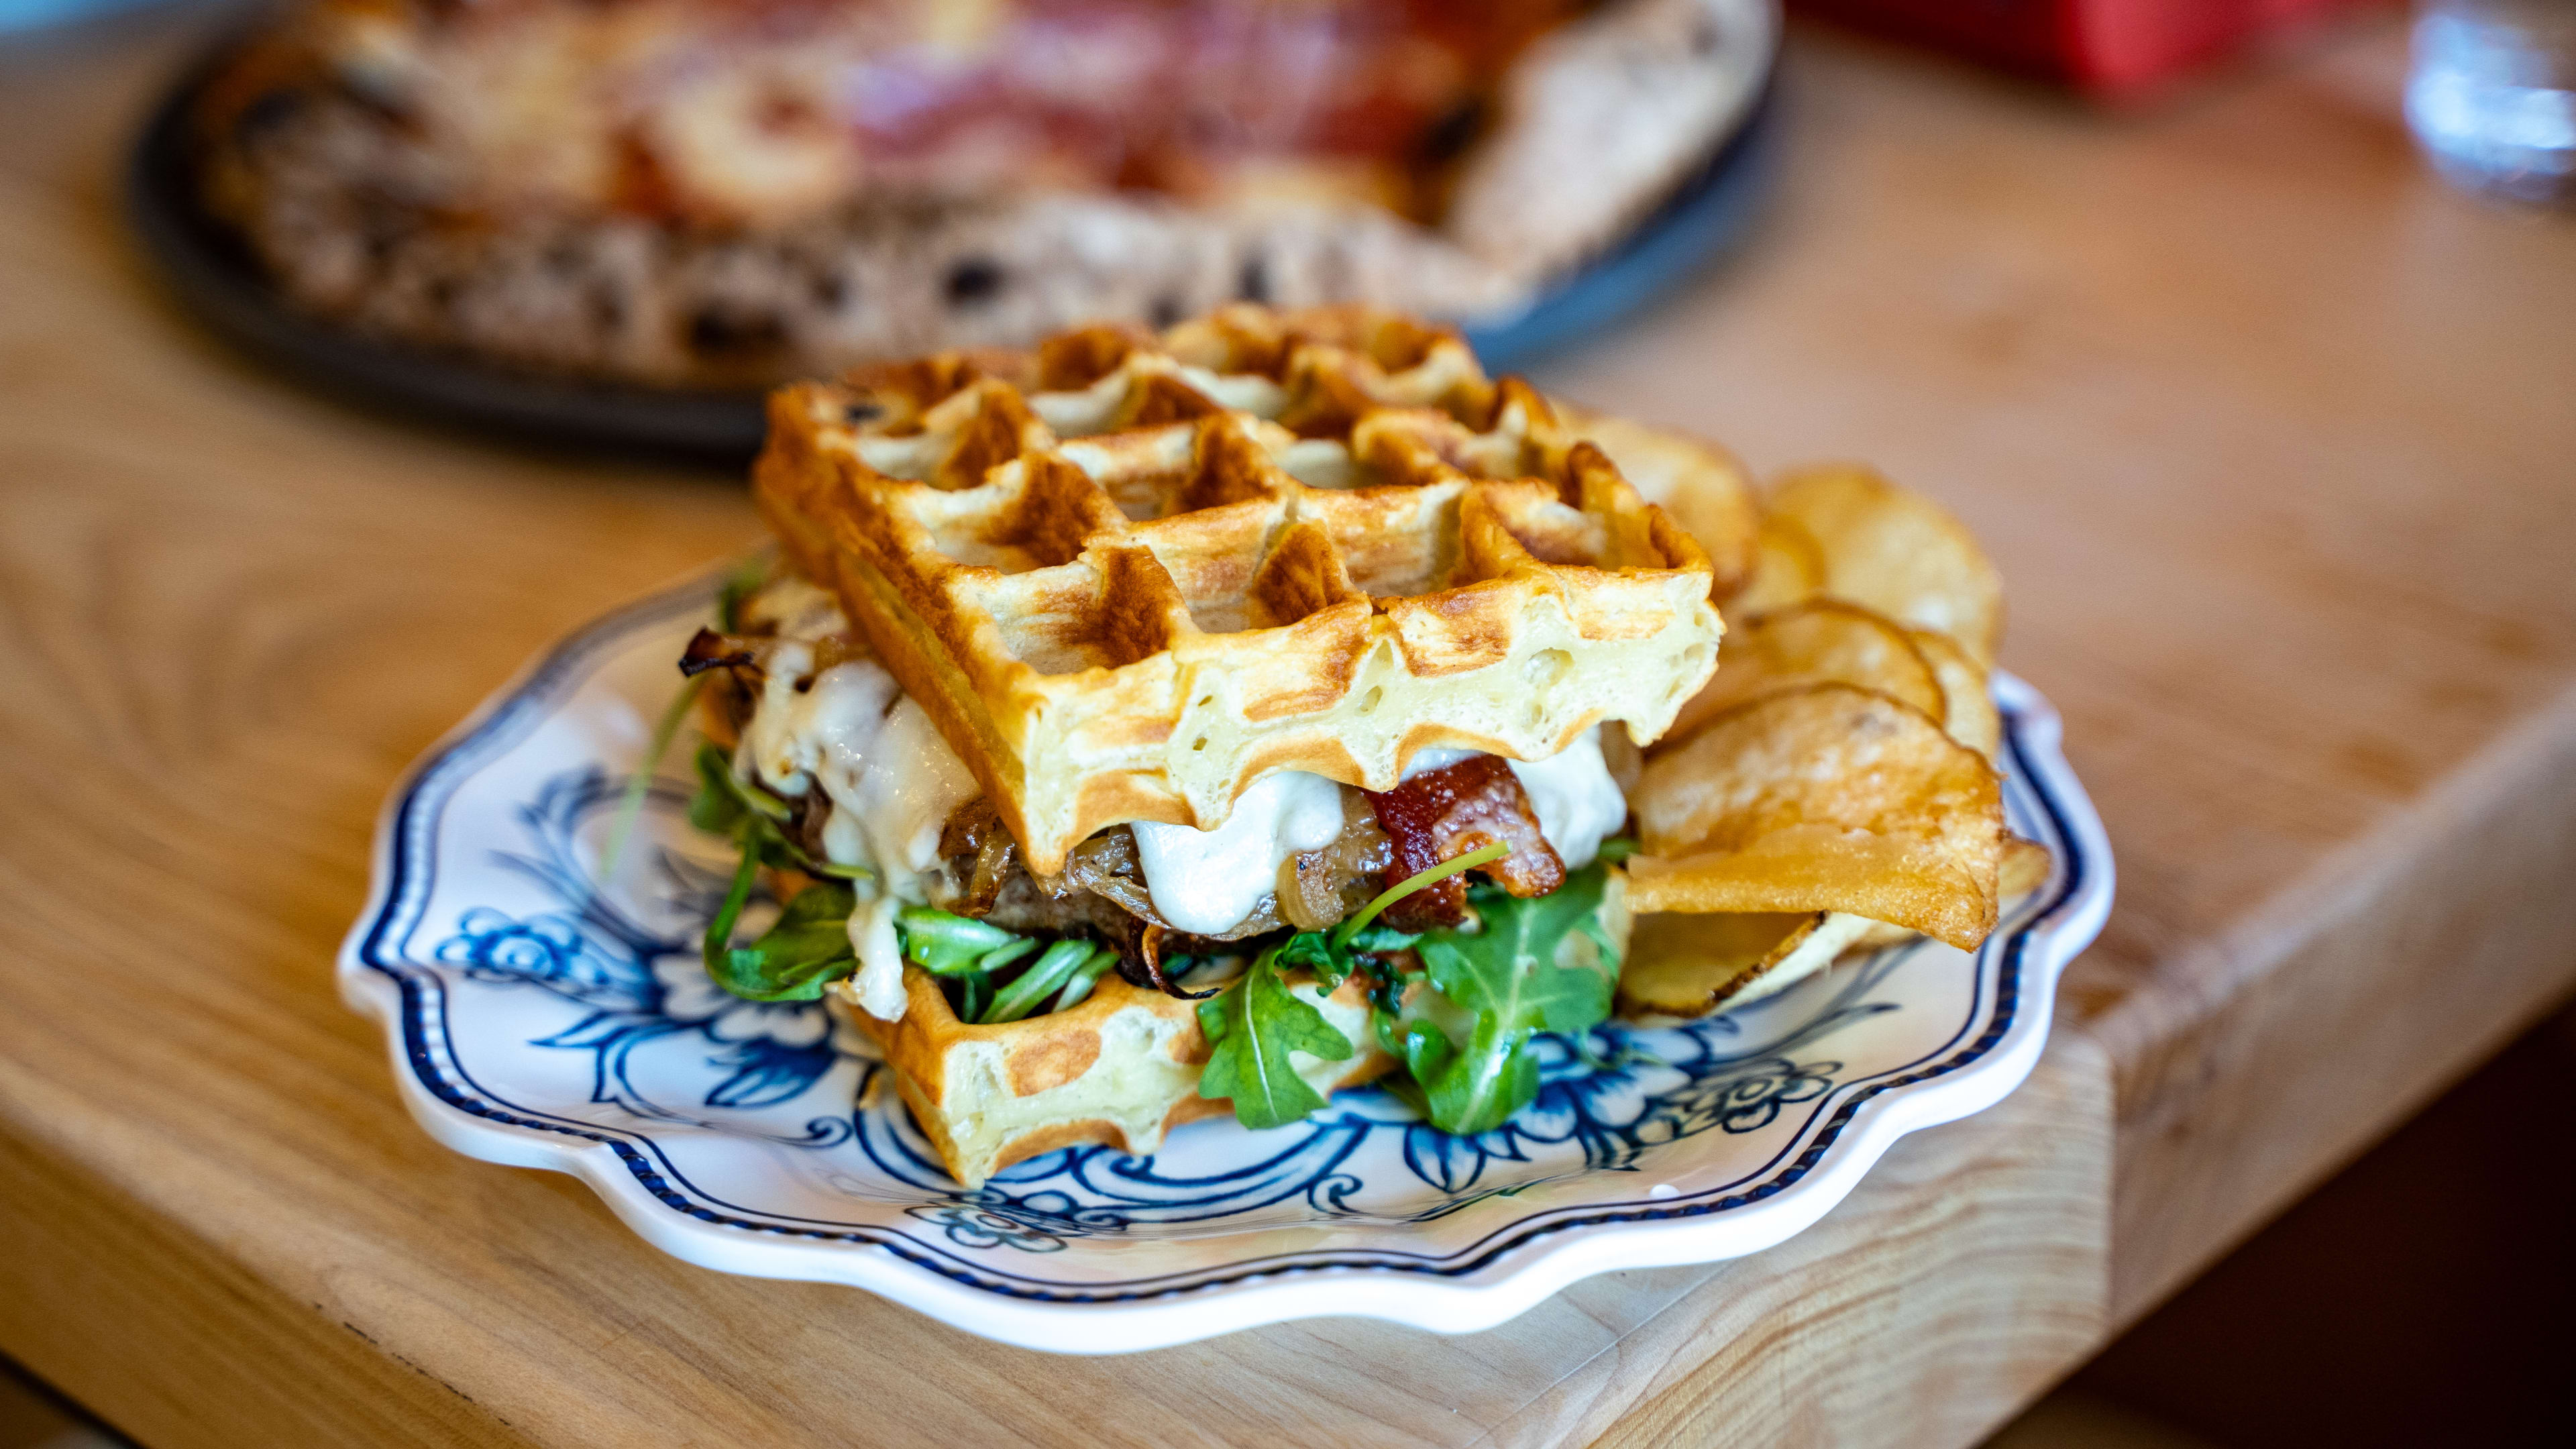 Burger between two waffles topped with arugula, bacon, and cheese, and served next to chips on a china plate.